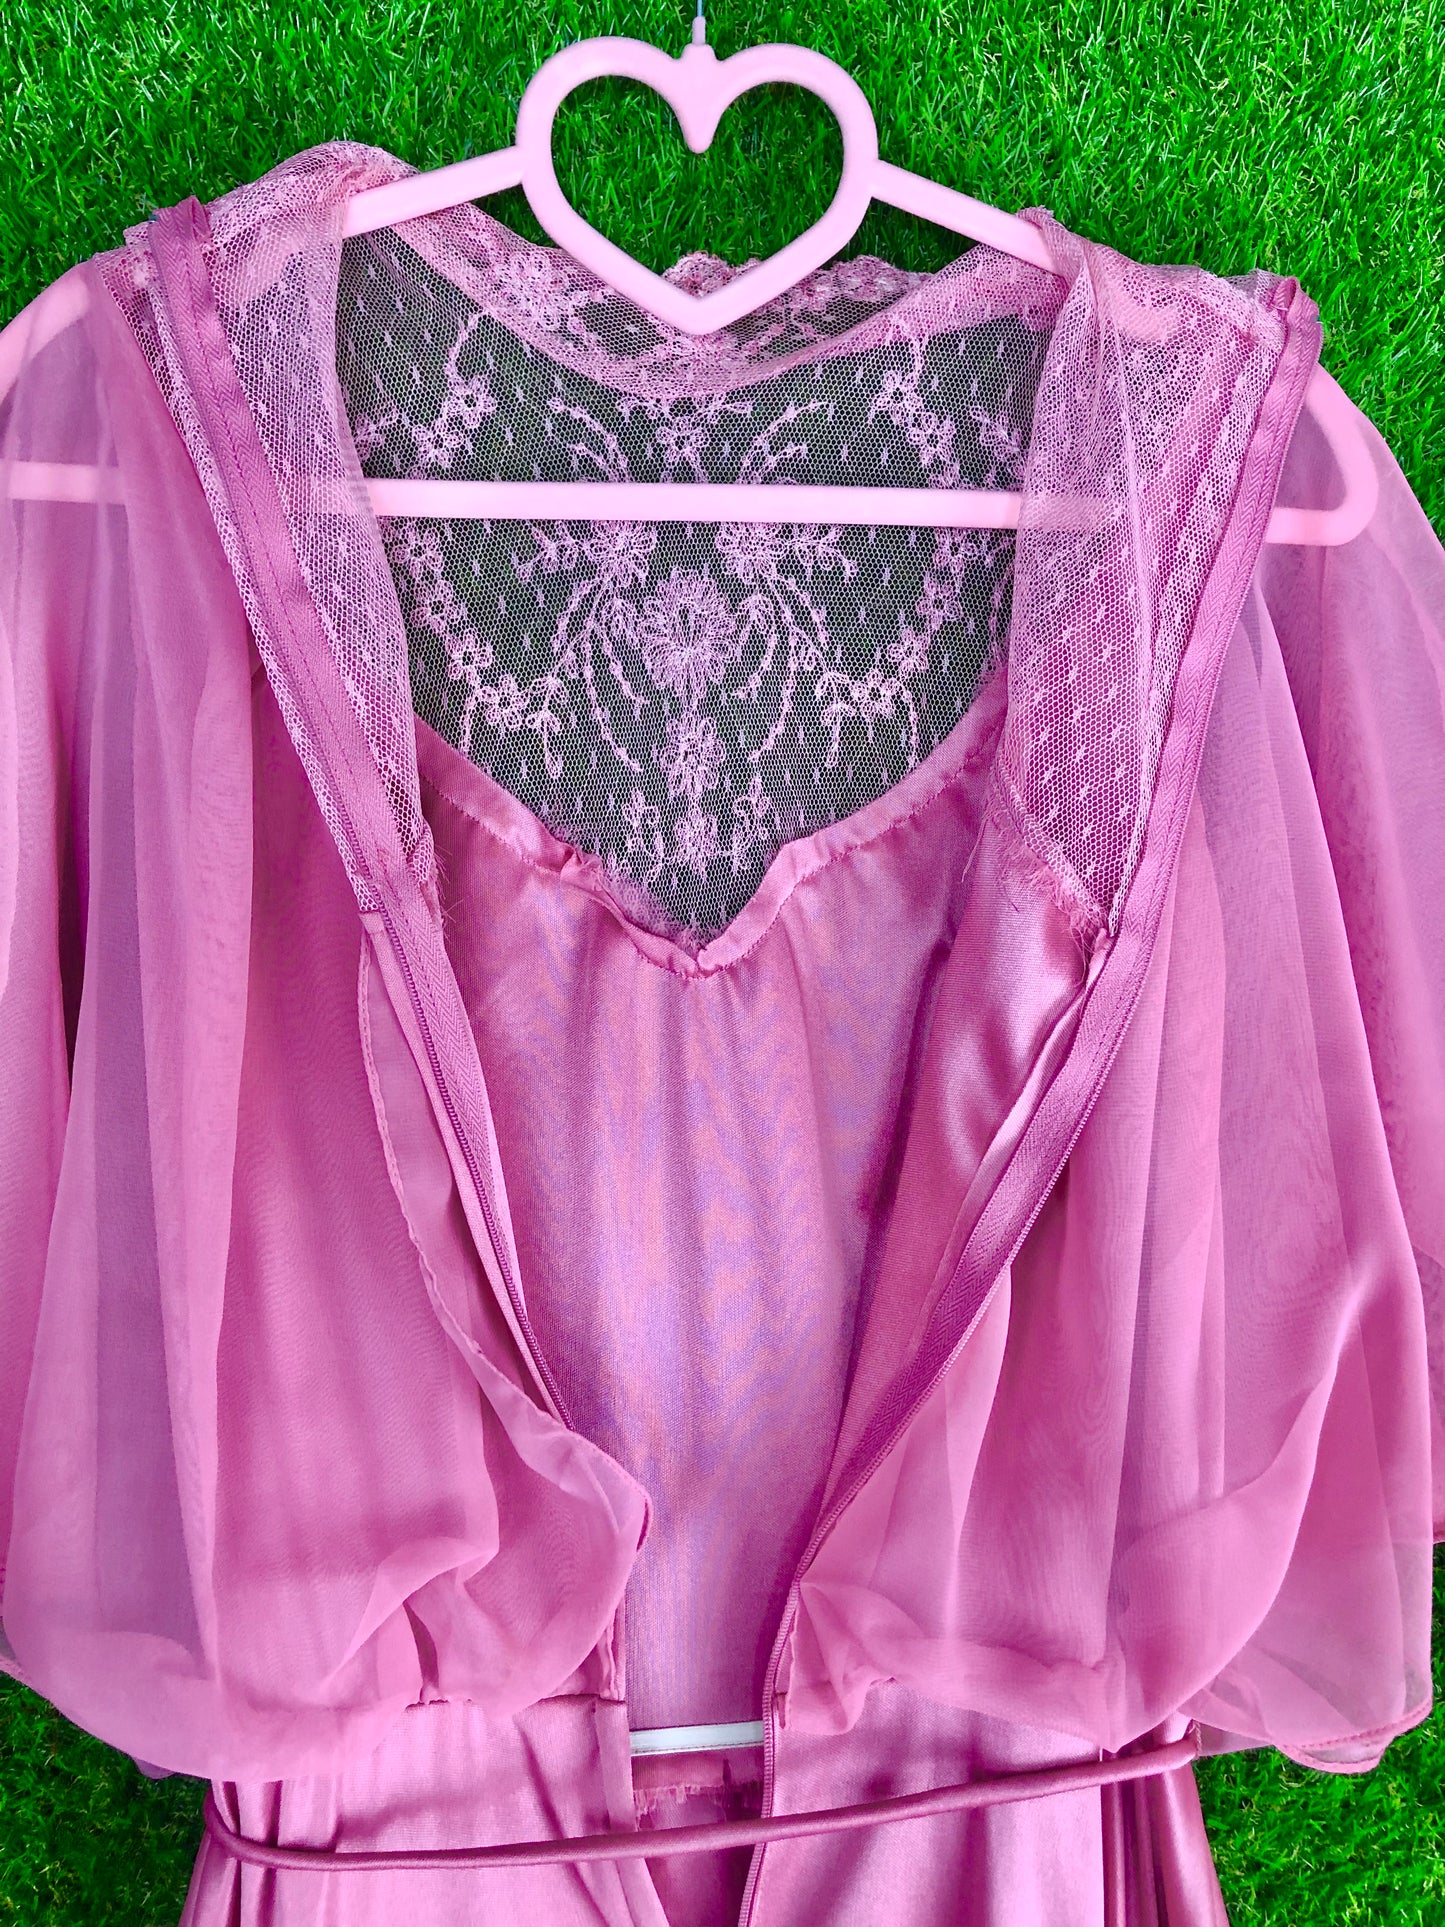 1970's Soft Pink Maxi Dress with Lace Details